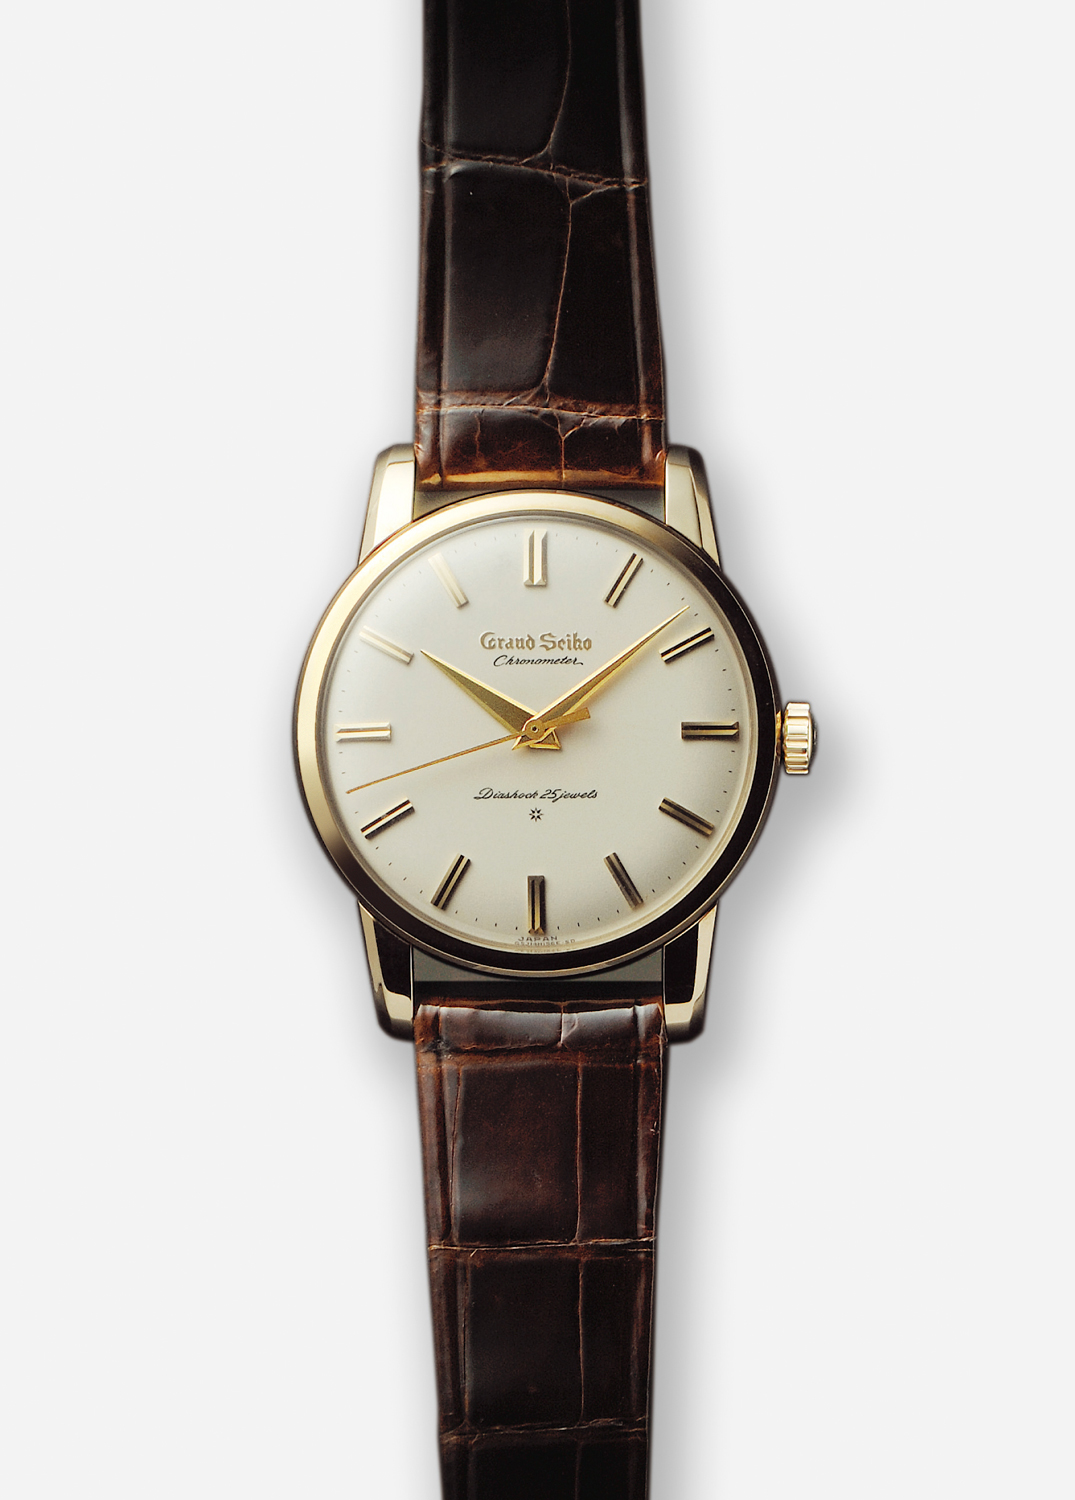 First grand Seiko in yellow gold with a brown strap on light backdrop.